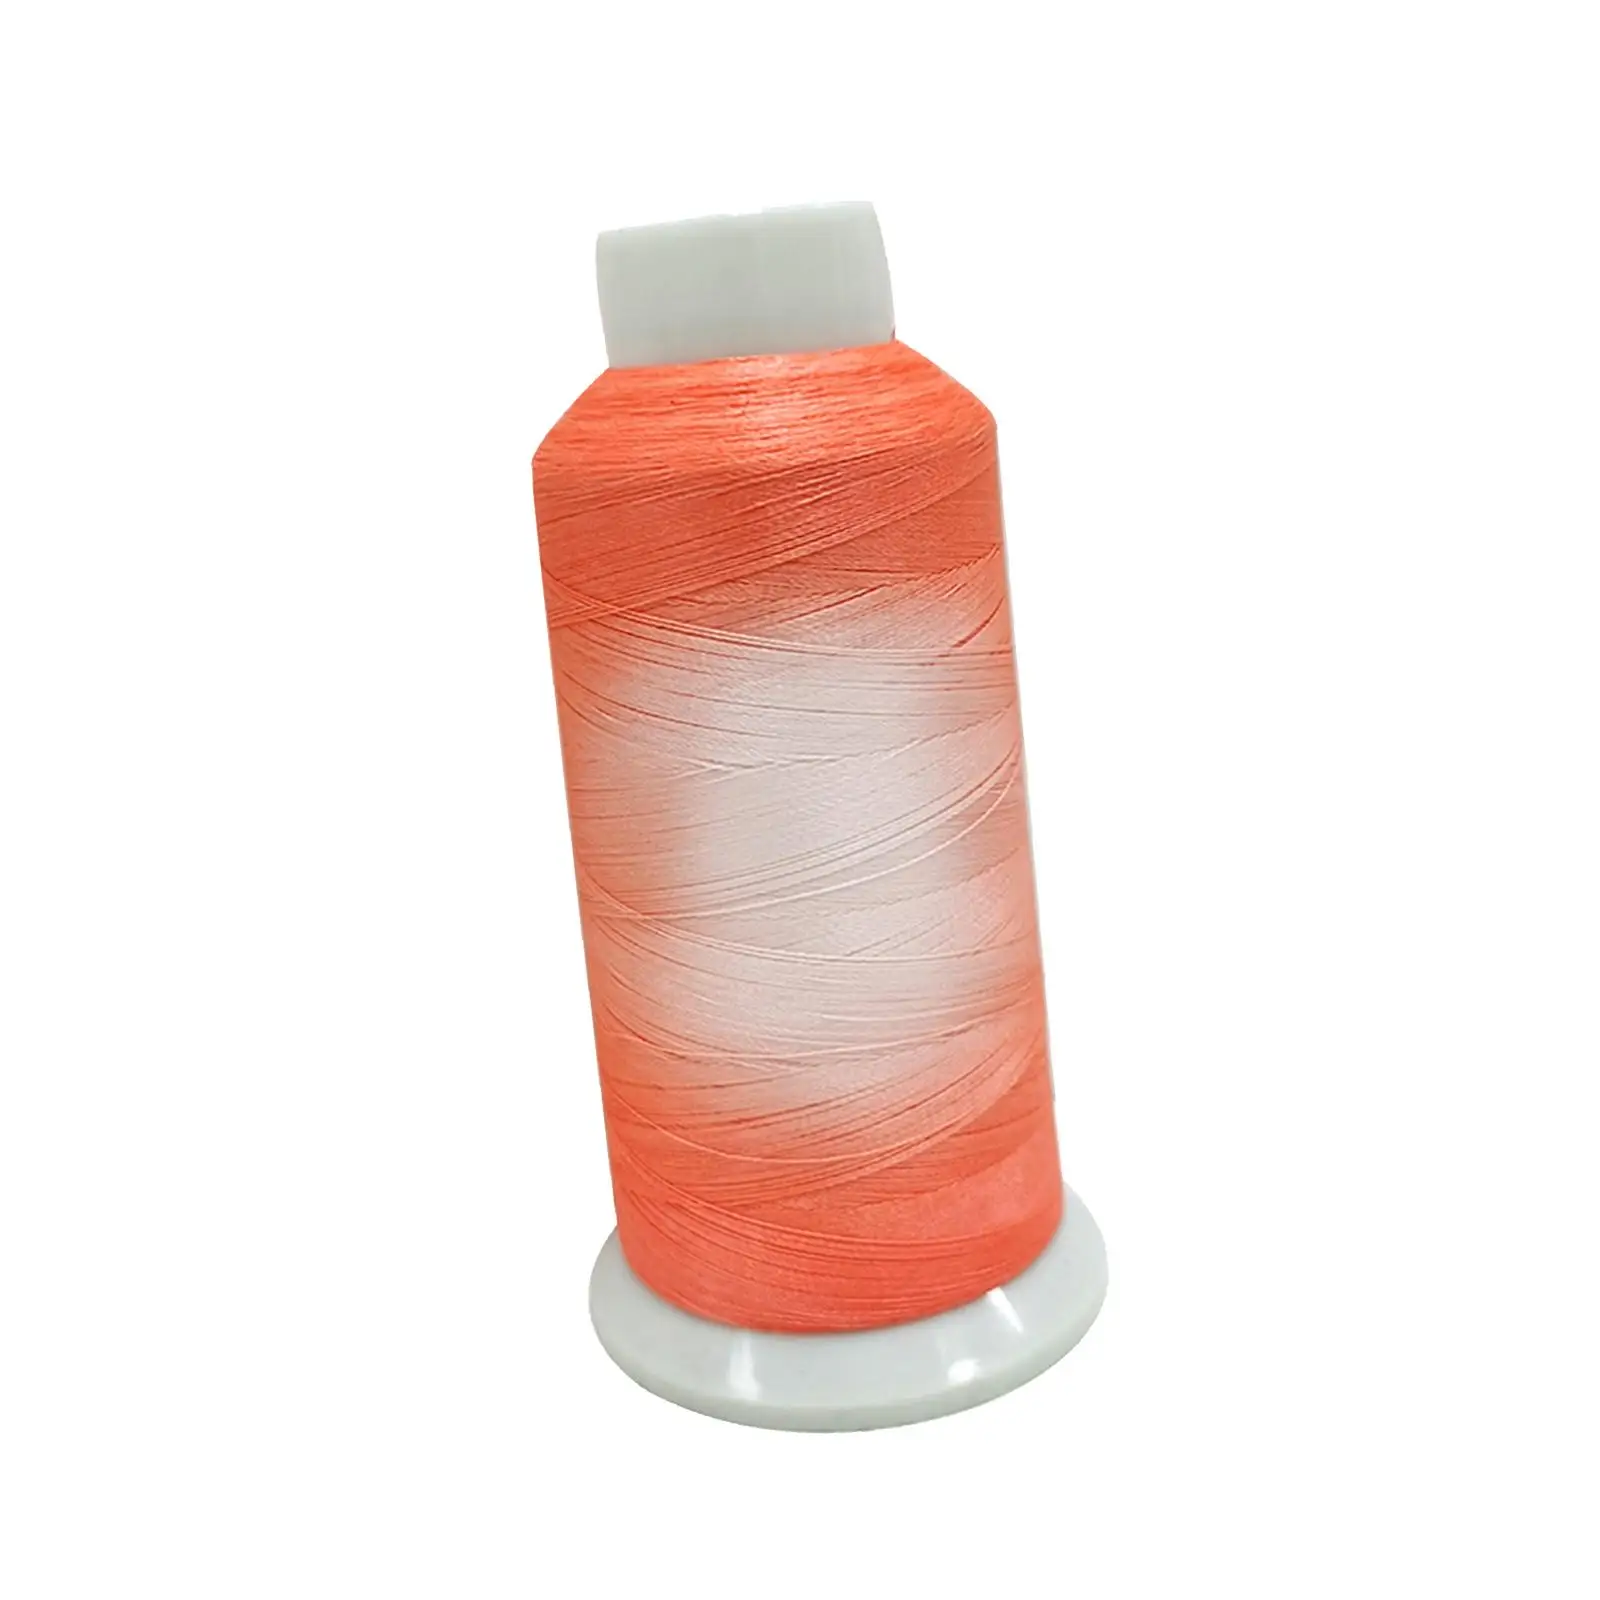 Colorful Color Changing Thread Embroidery Polyester Sewing Thread Spool Supplies for Sewing Quilting Blanket Hat Scarf